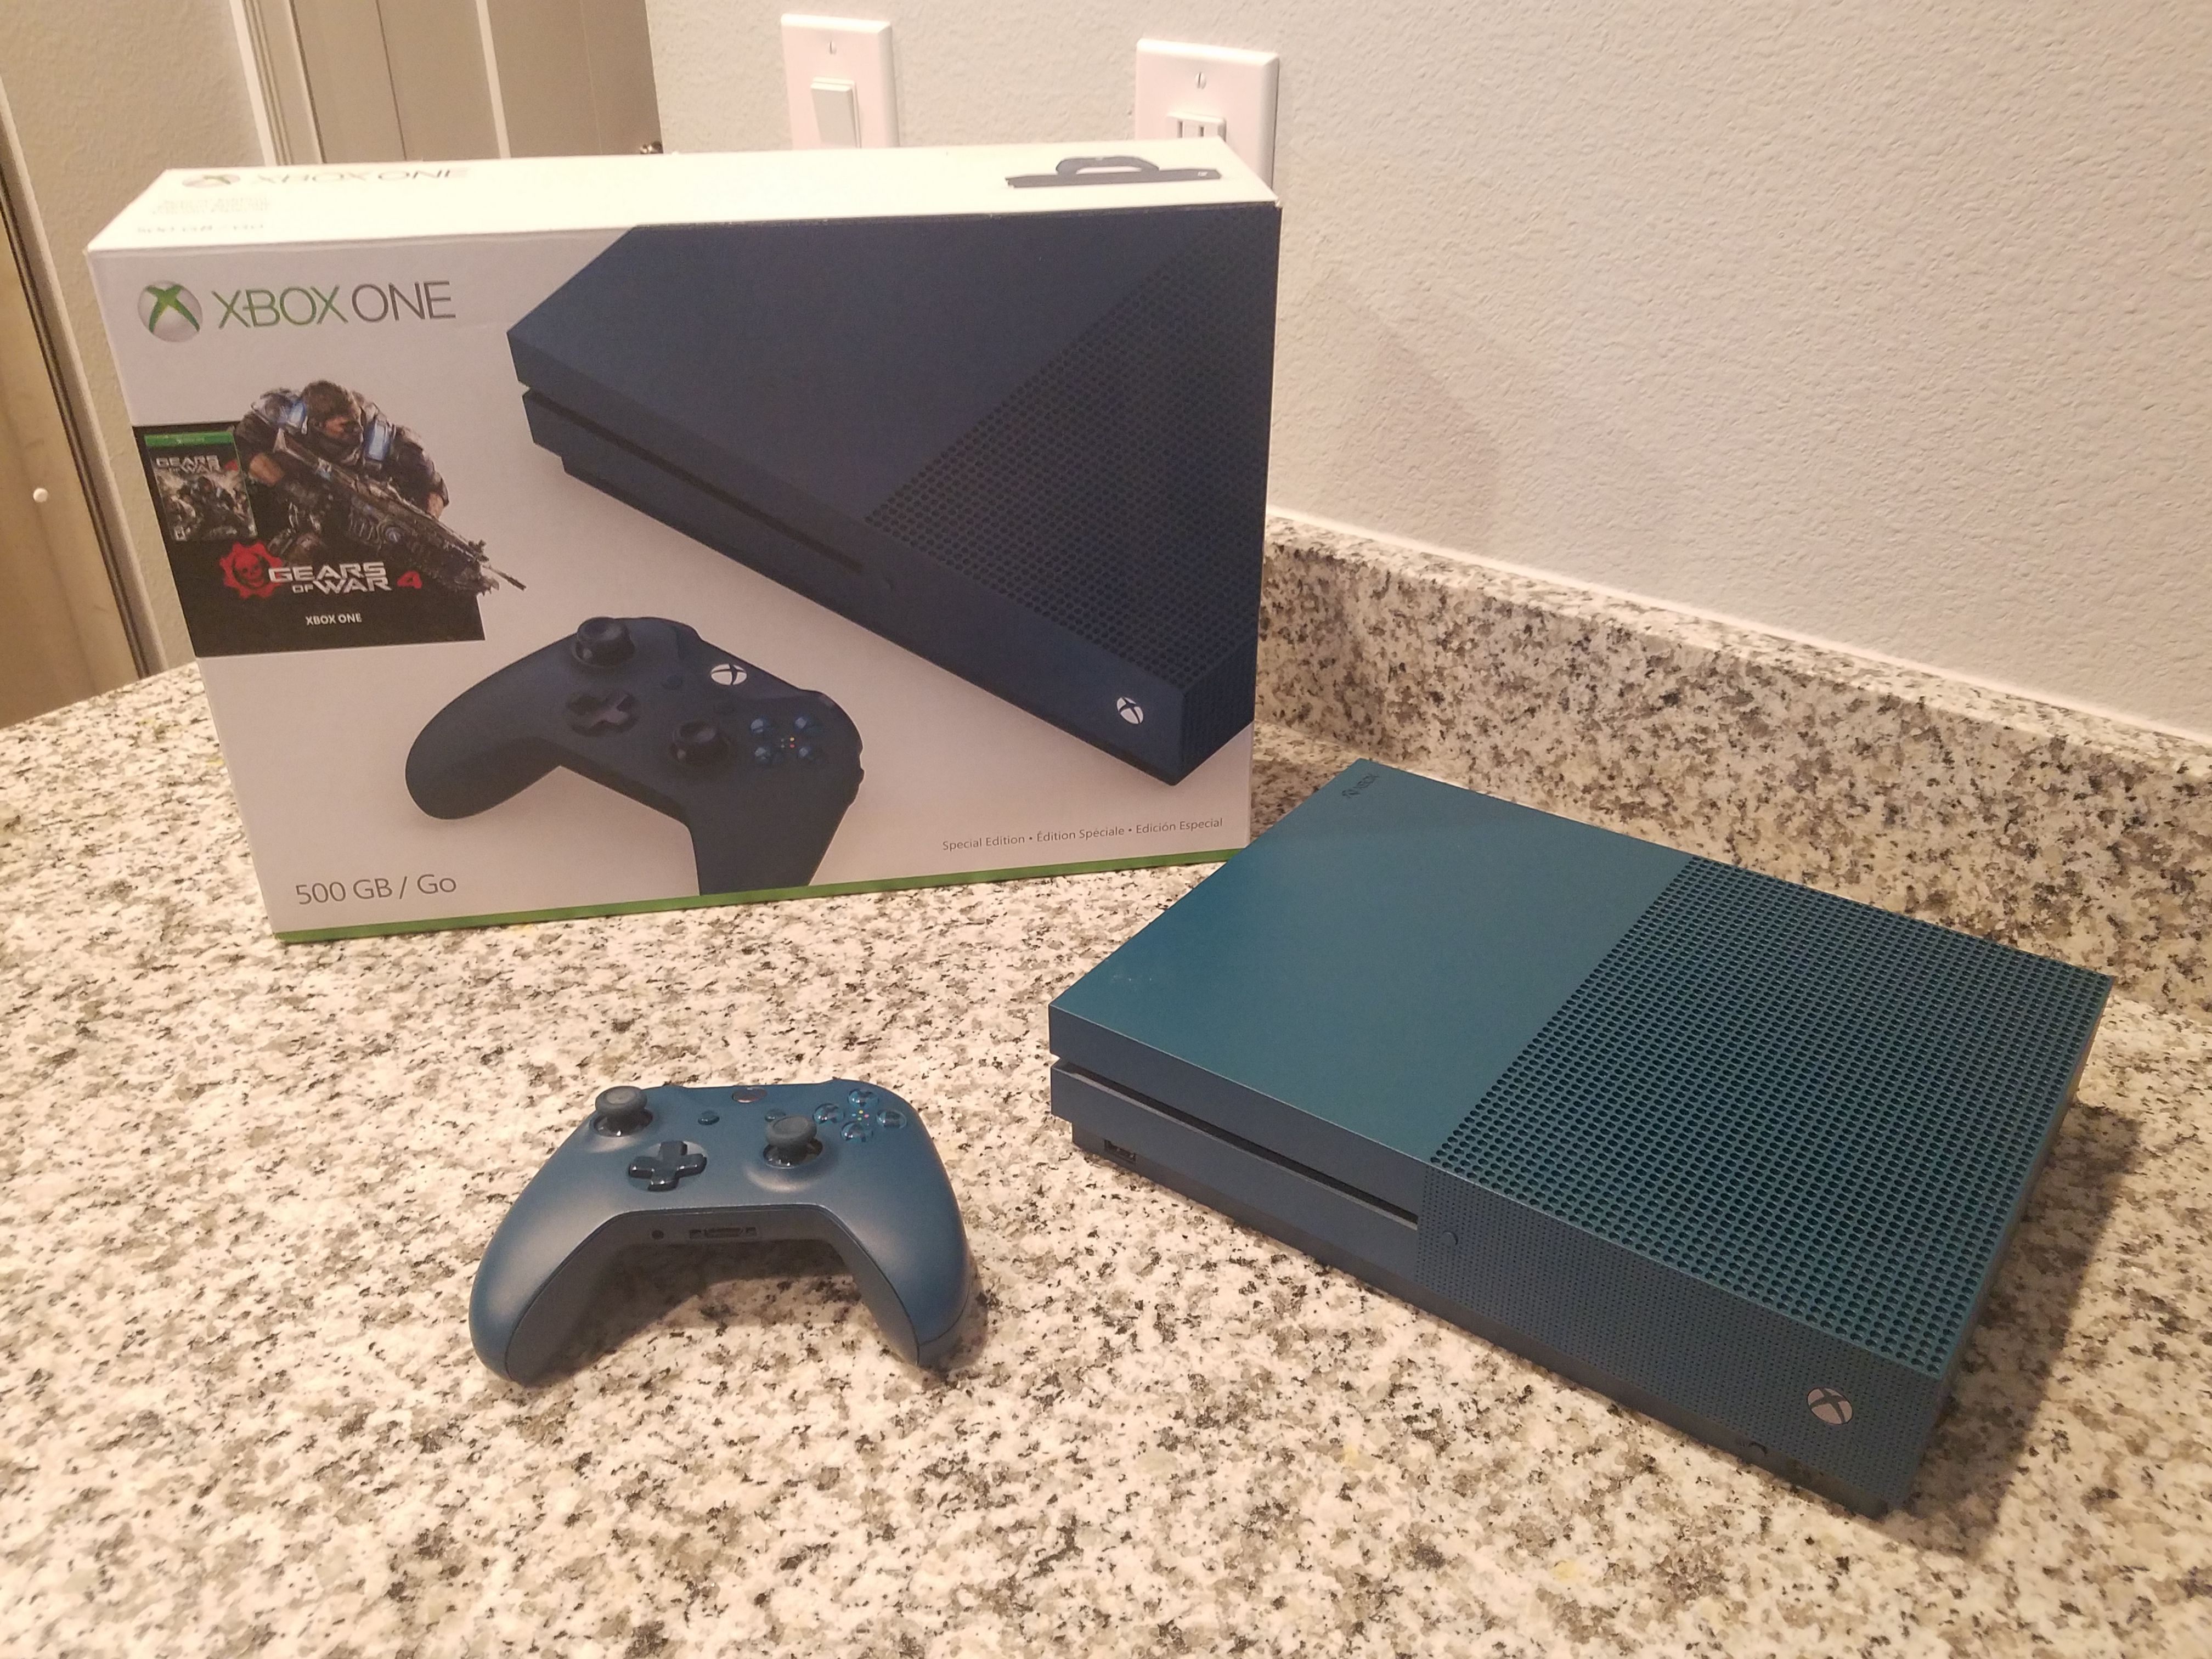 X-BOX One special edition with games